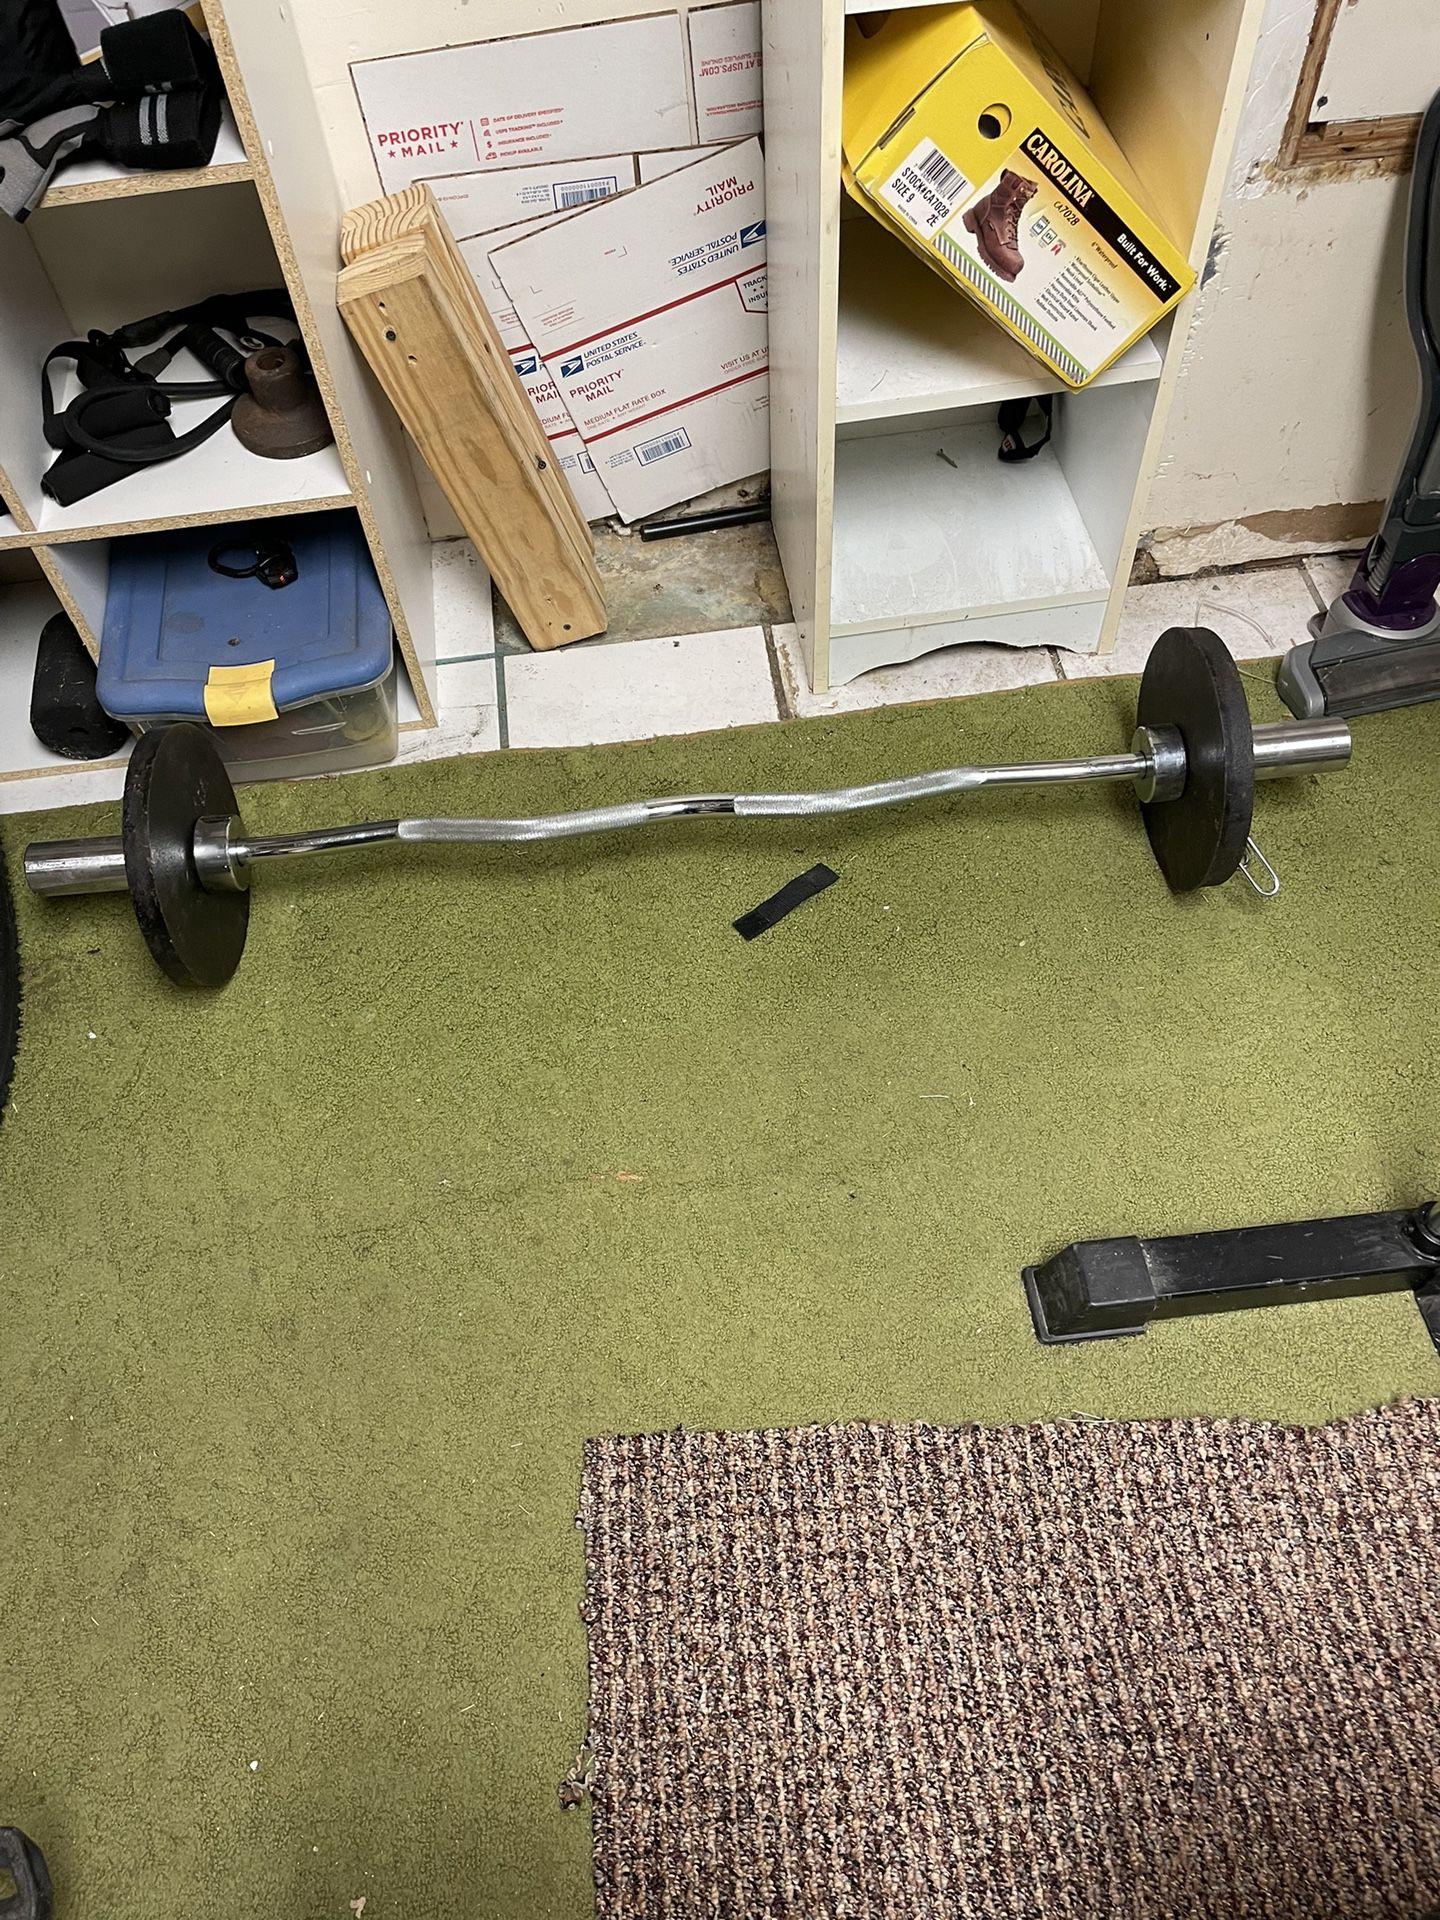 Olympic weight set for sale, curl bar and Olympic weights